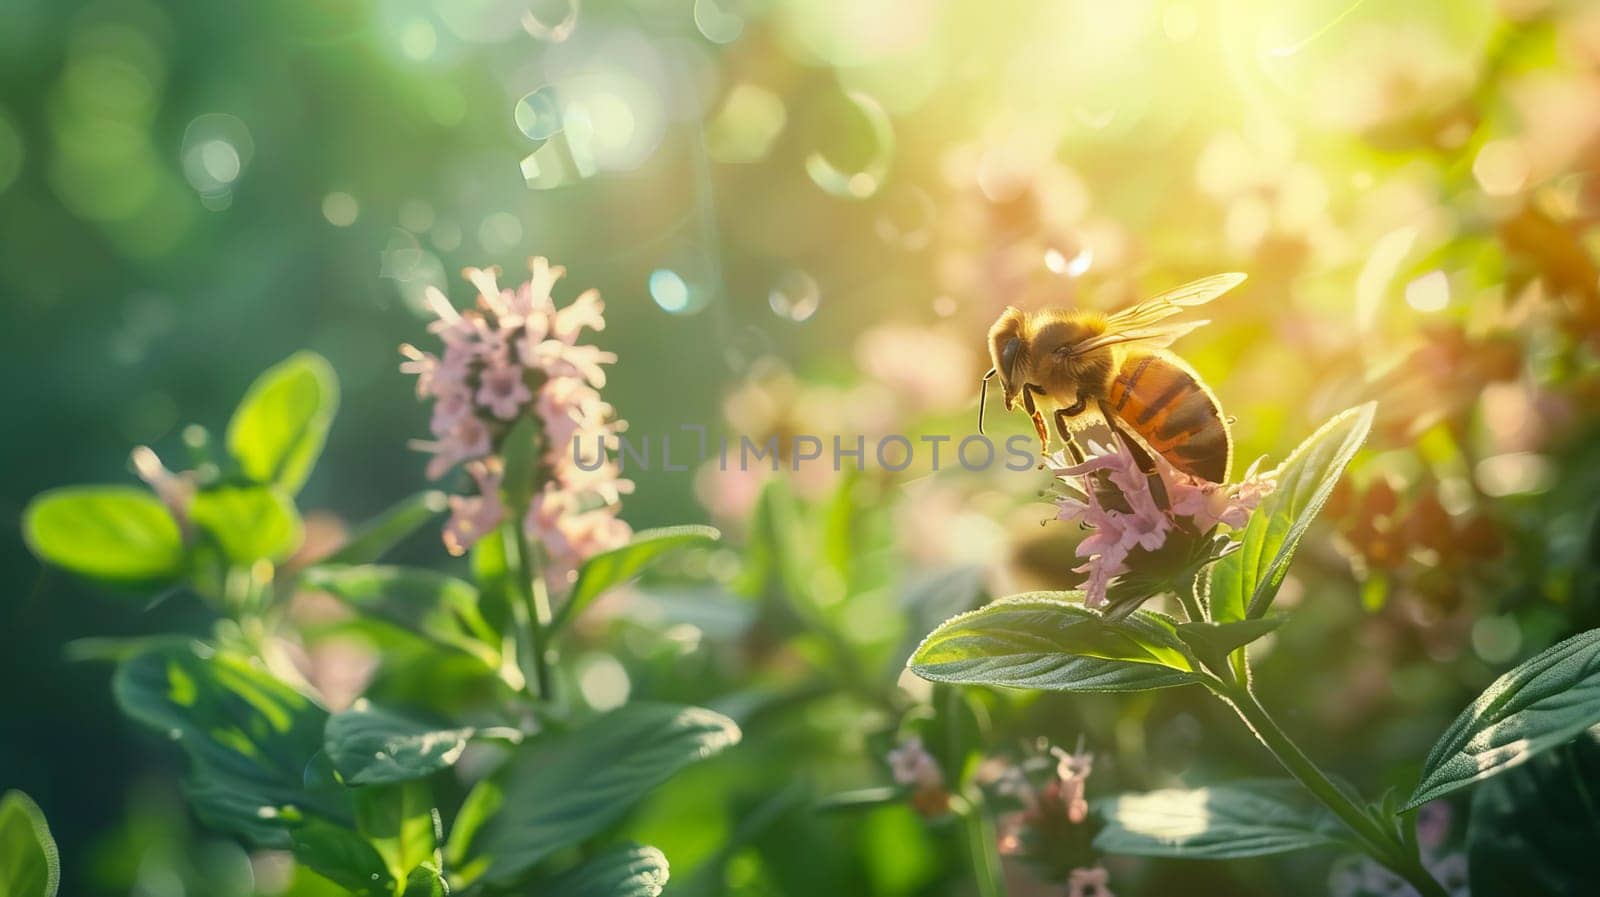 A honey bee collects nectar from oregano flowers in a garden in summer.